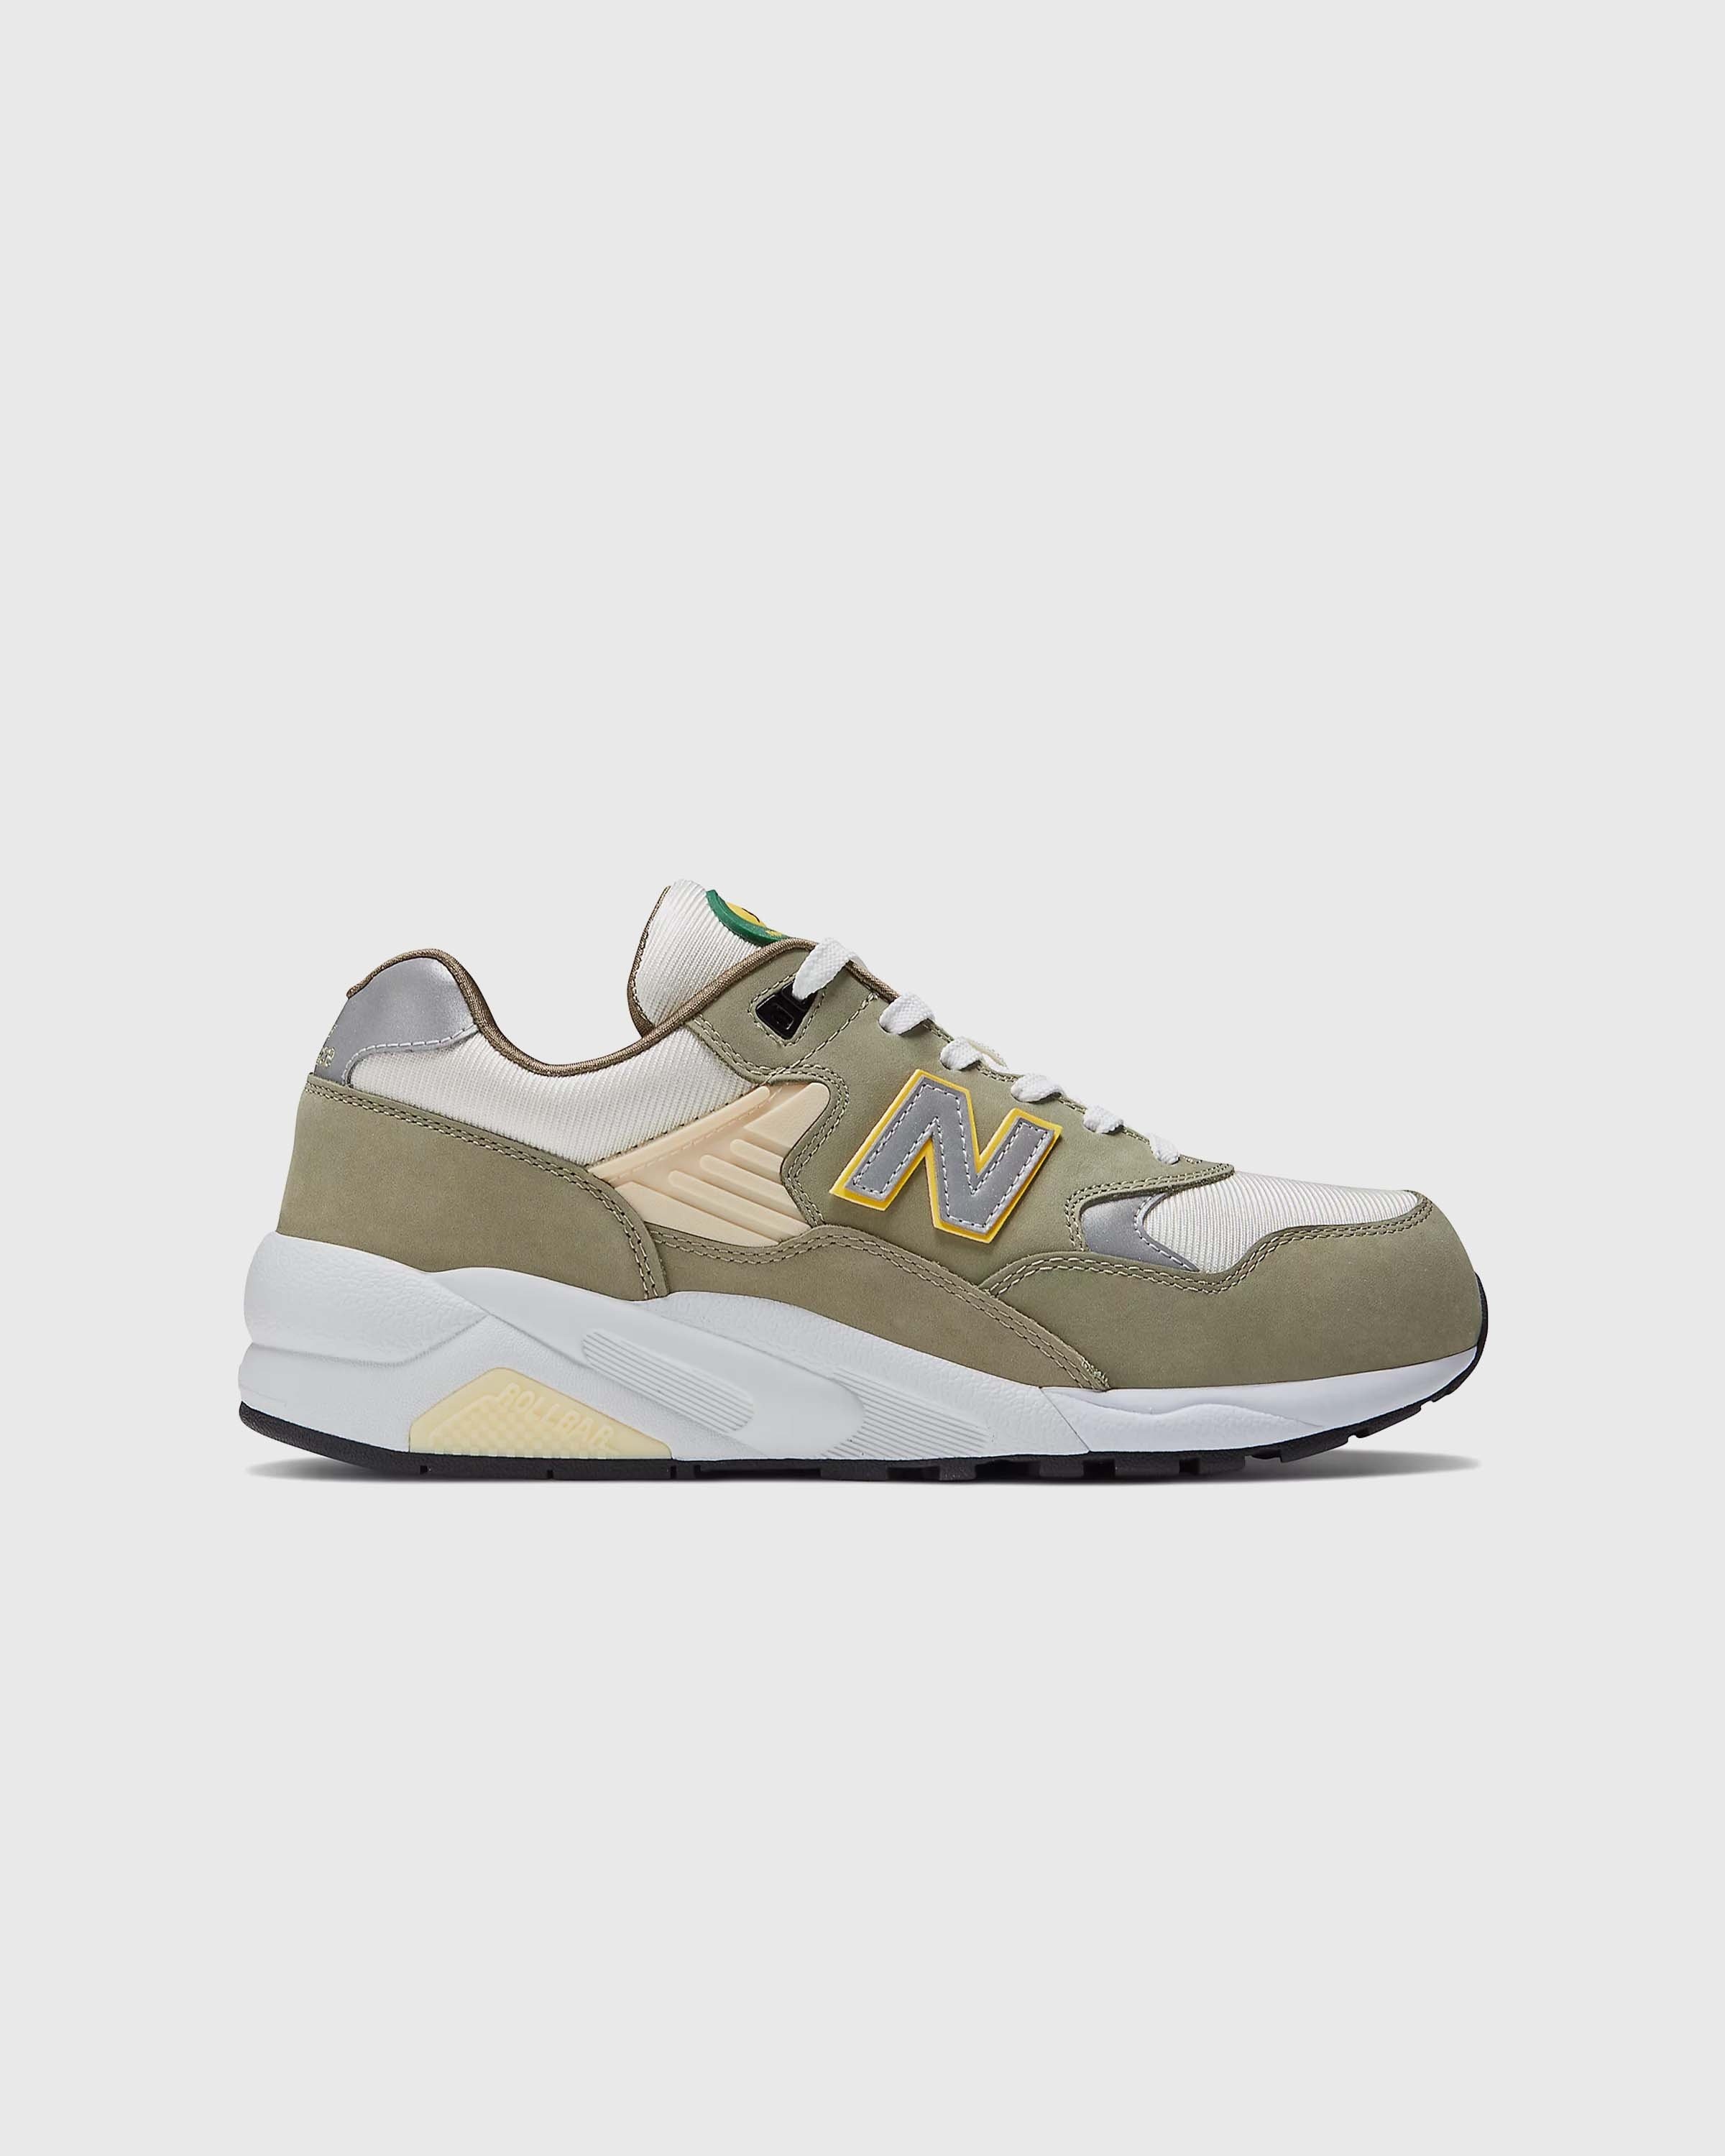 New Balance – MT580AC2 Olive Leaf - Low Top Sneakers - Green - Image 1